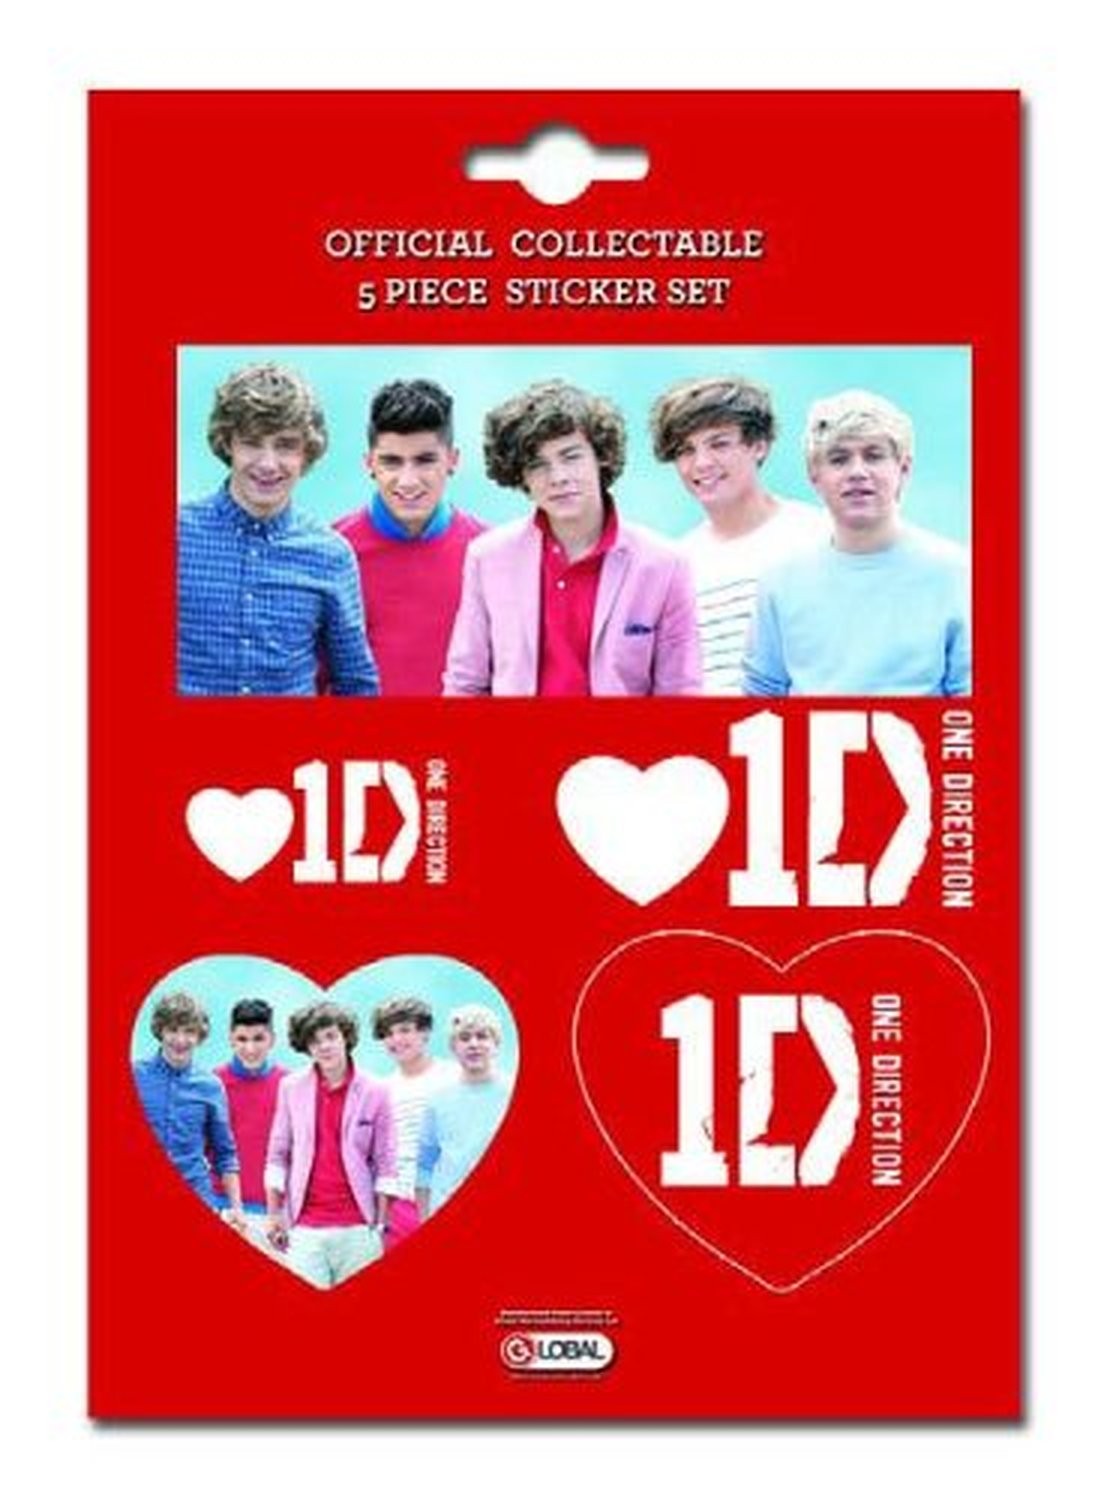 1D One Direction 5 Piece Love Red Heart Sticker Set Band Photo Fan 100% Official